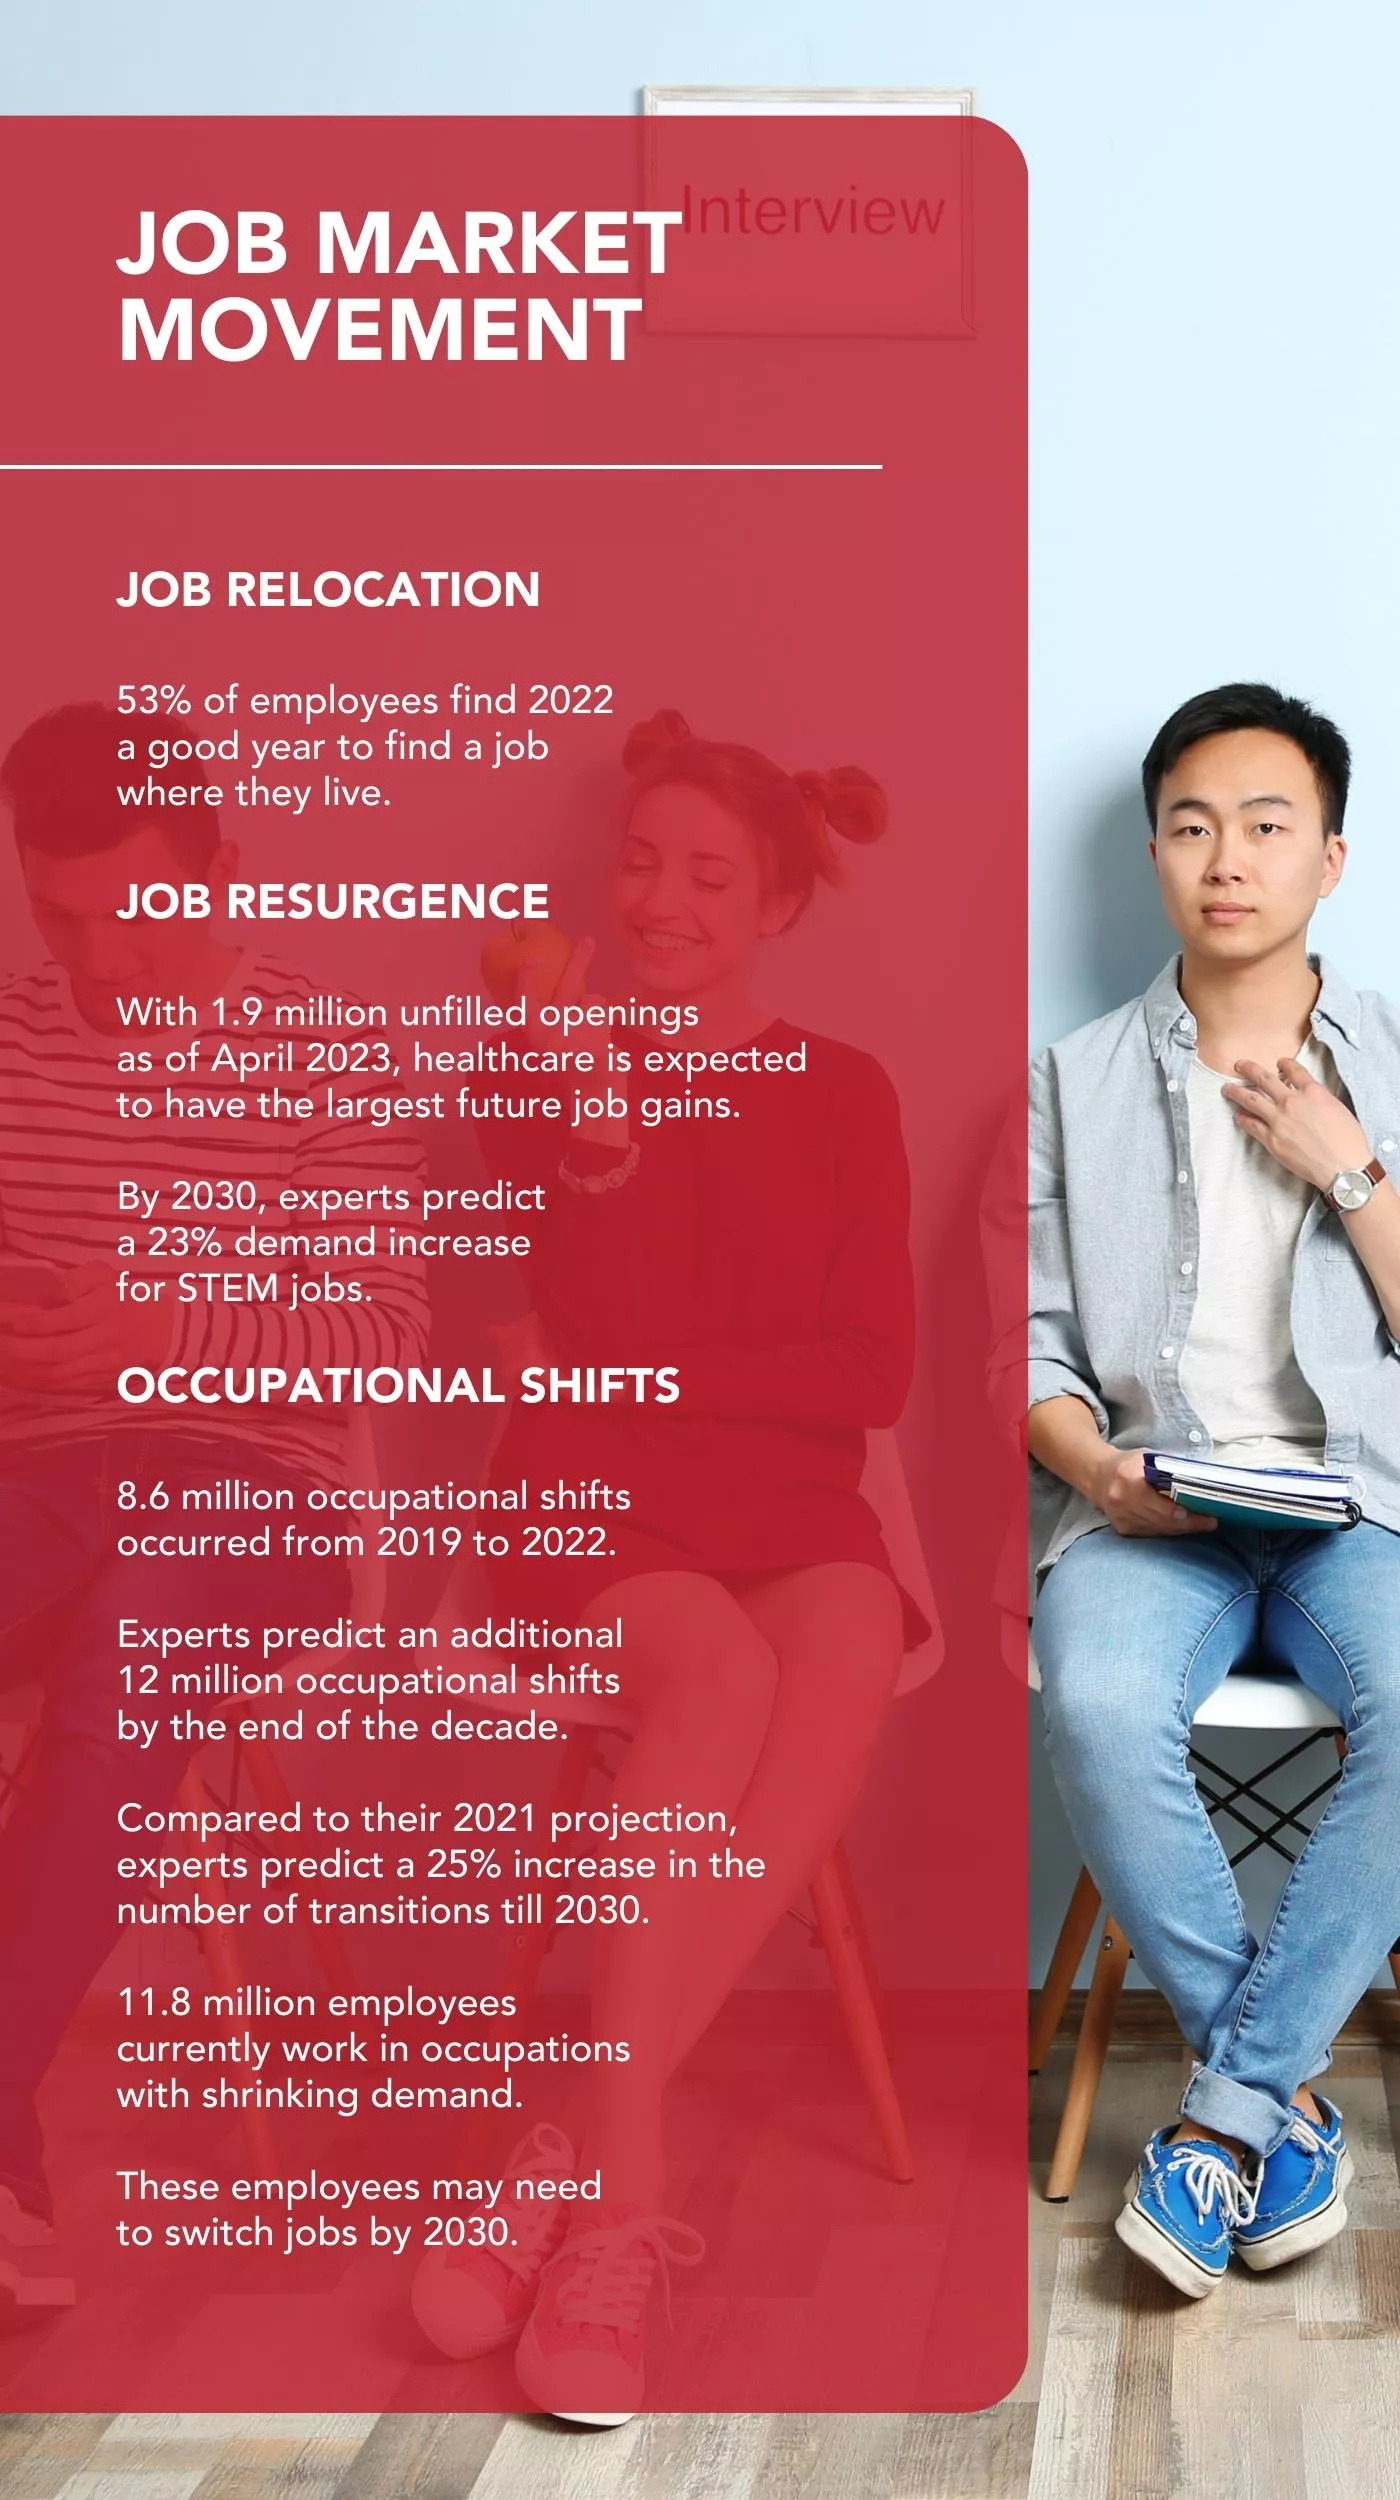 An infographic shows job market movement as it adapts to HR outsourcing trends.